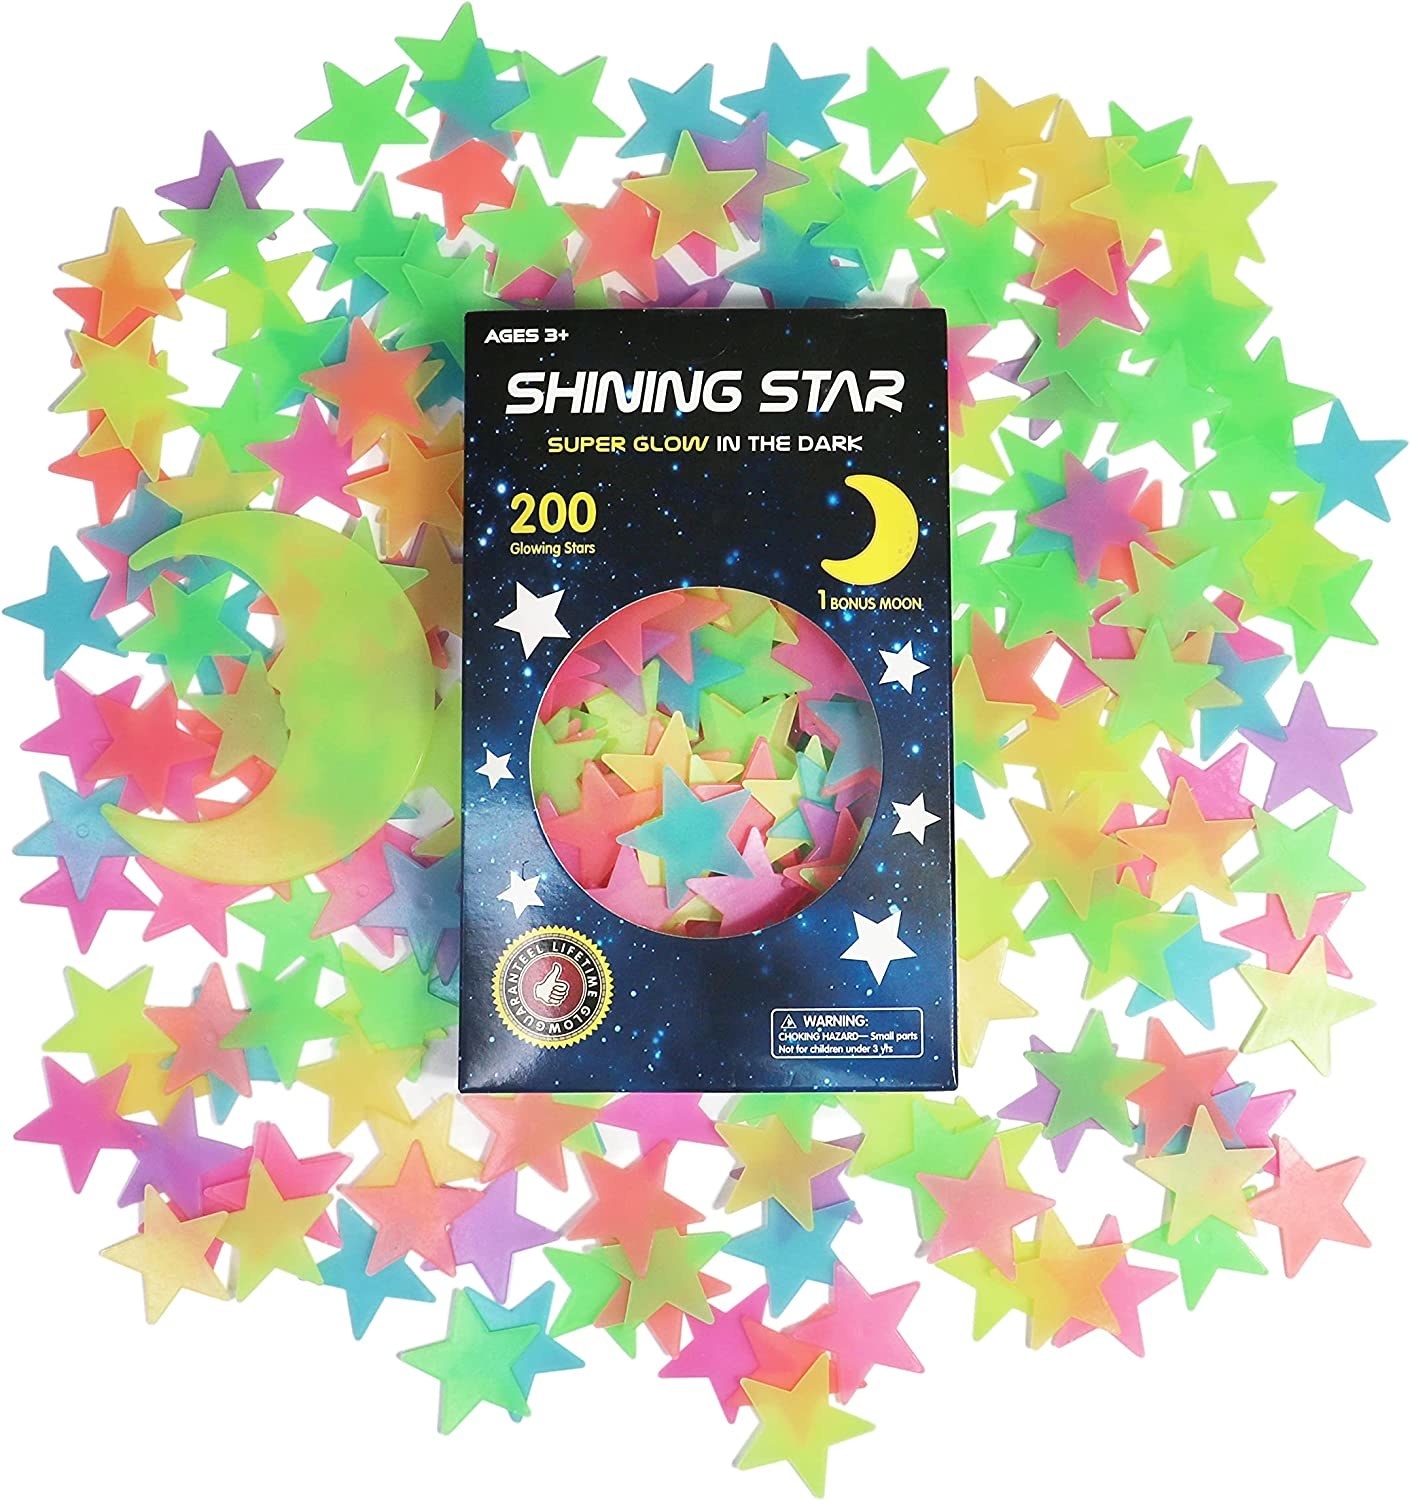 stars surrounding their package on a blank background